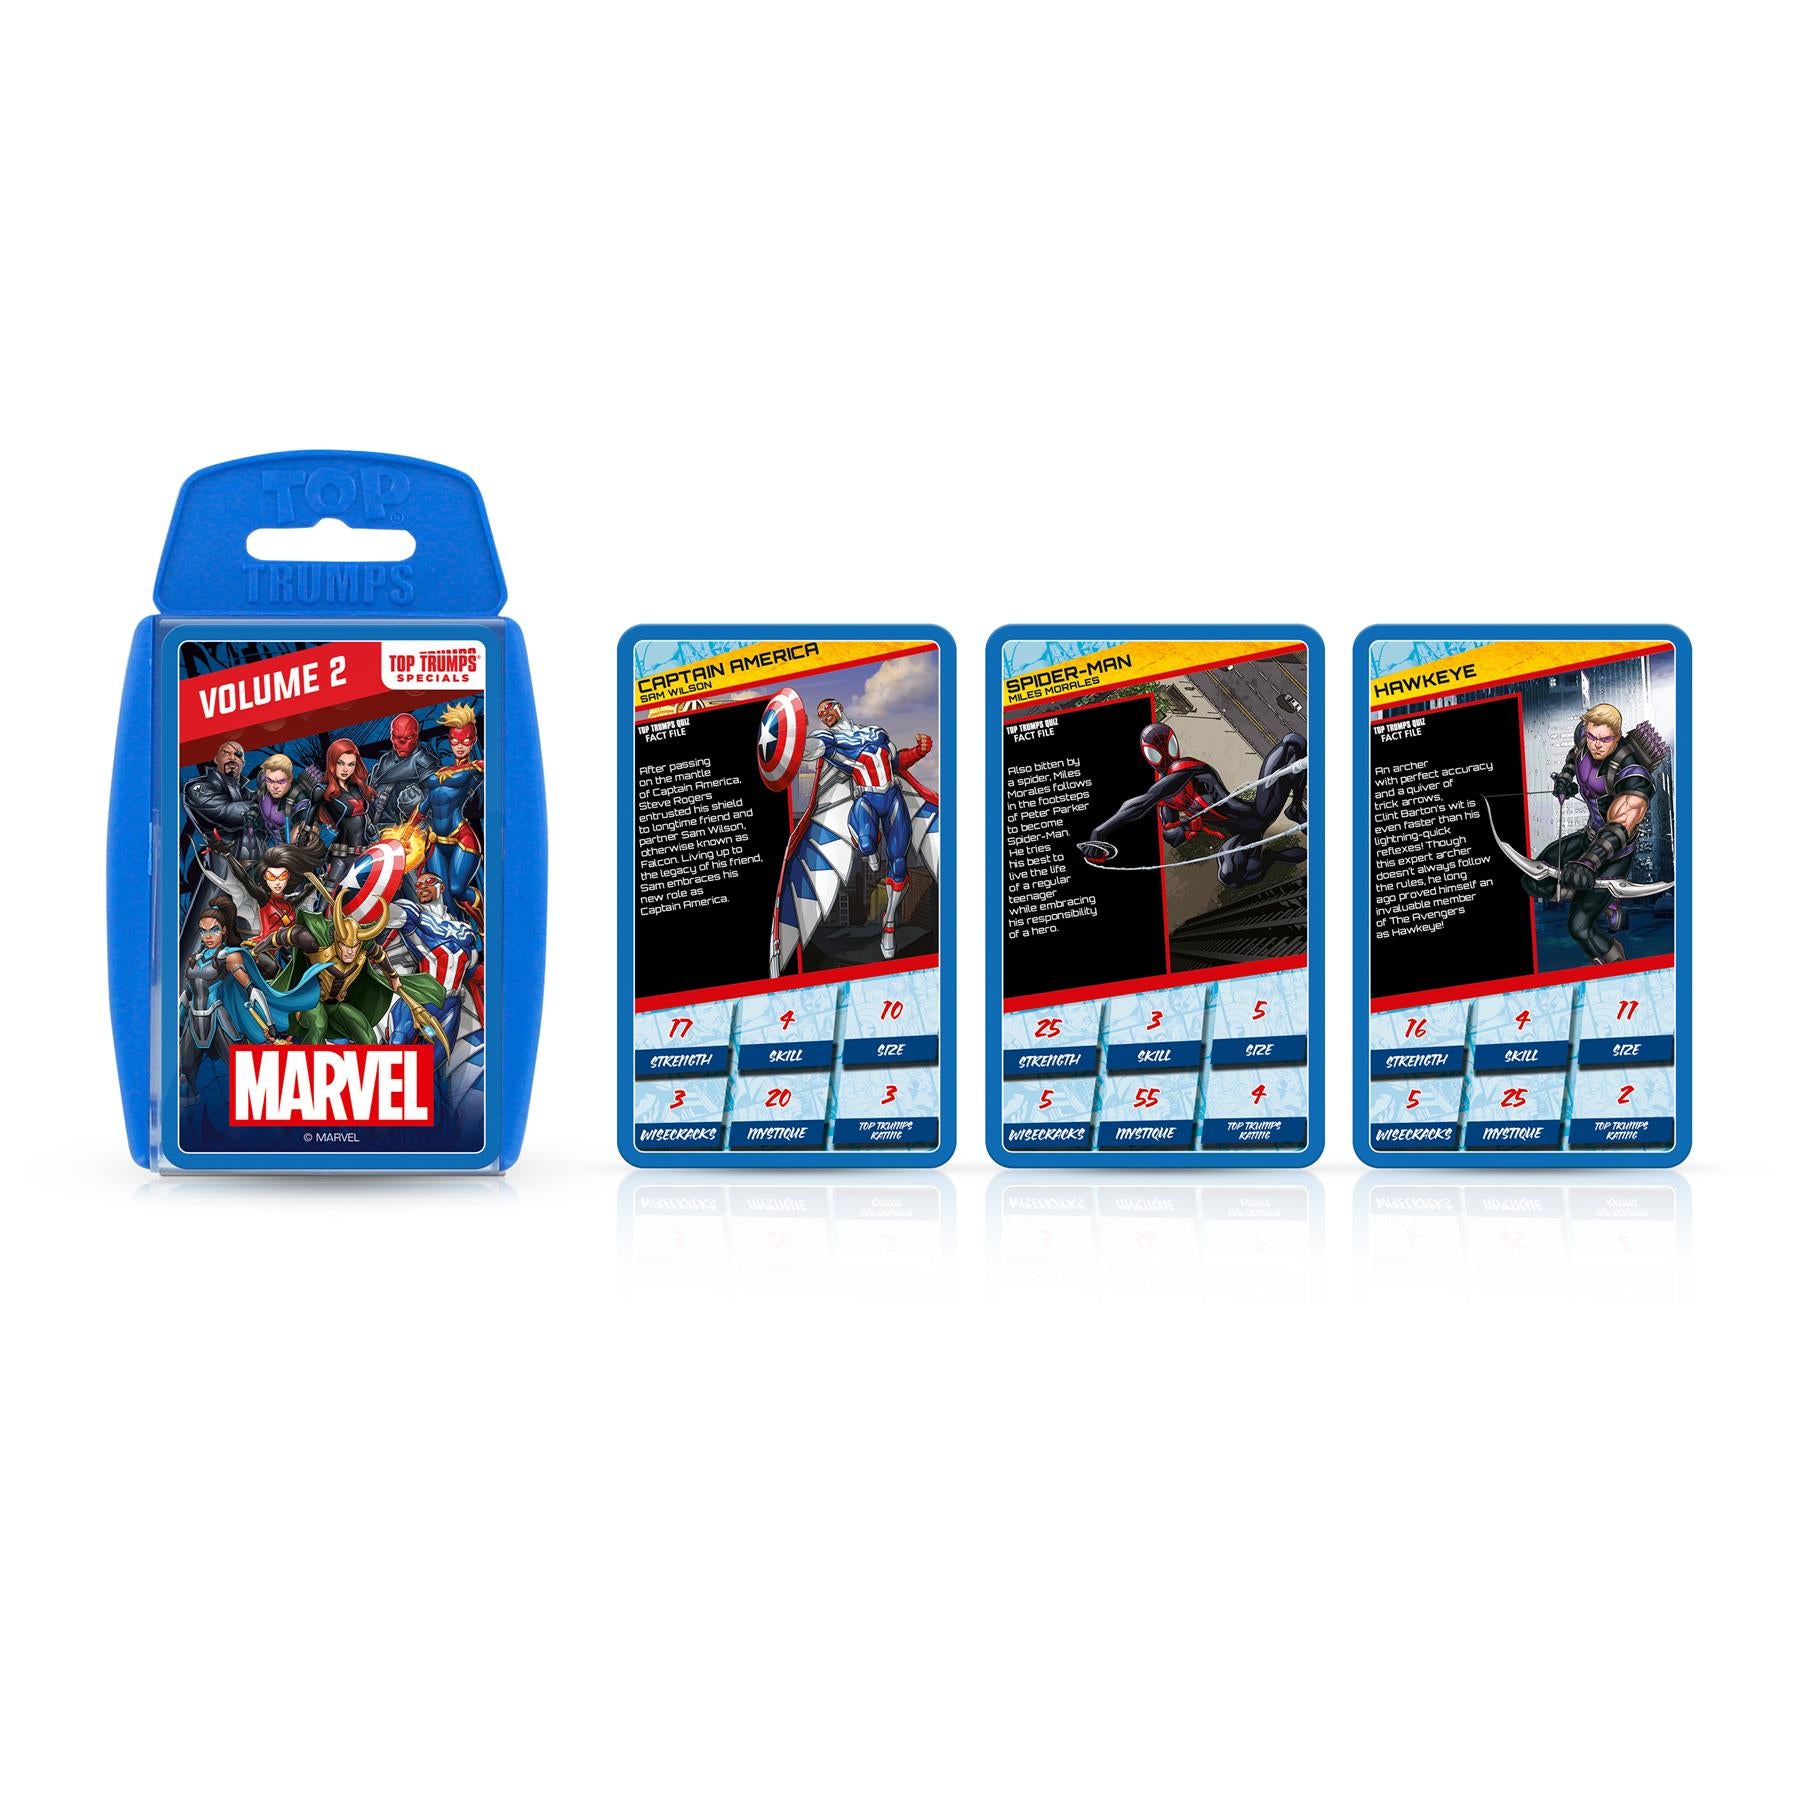 Marvel Univers 2 Top Trumps Card Game